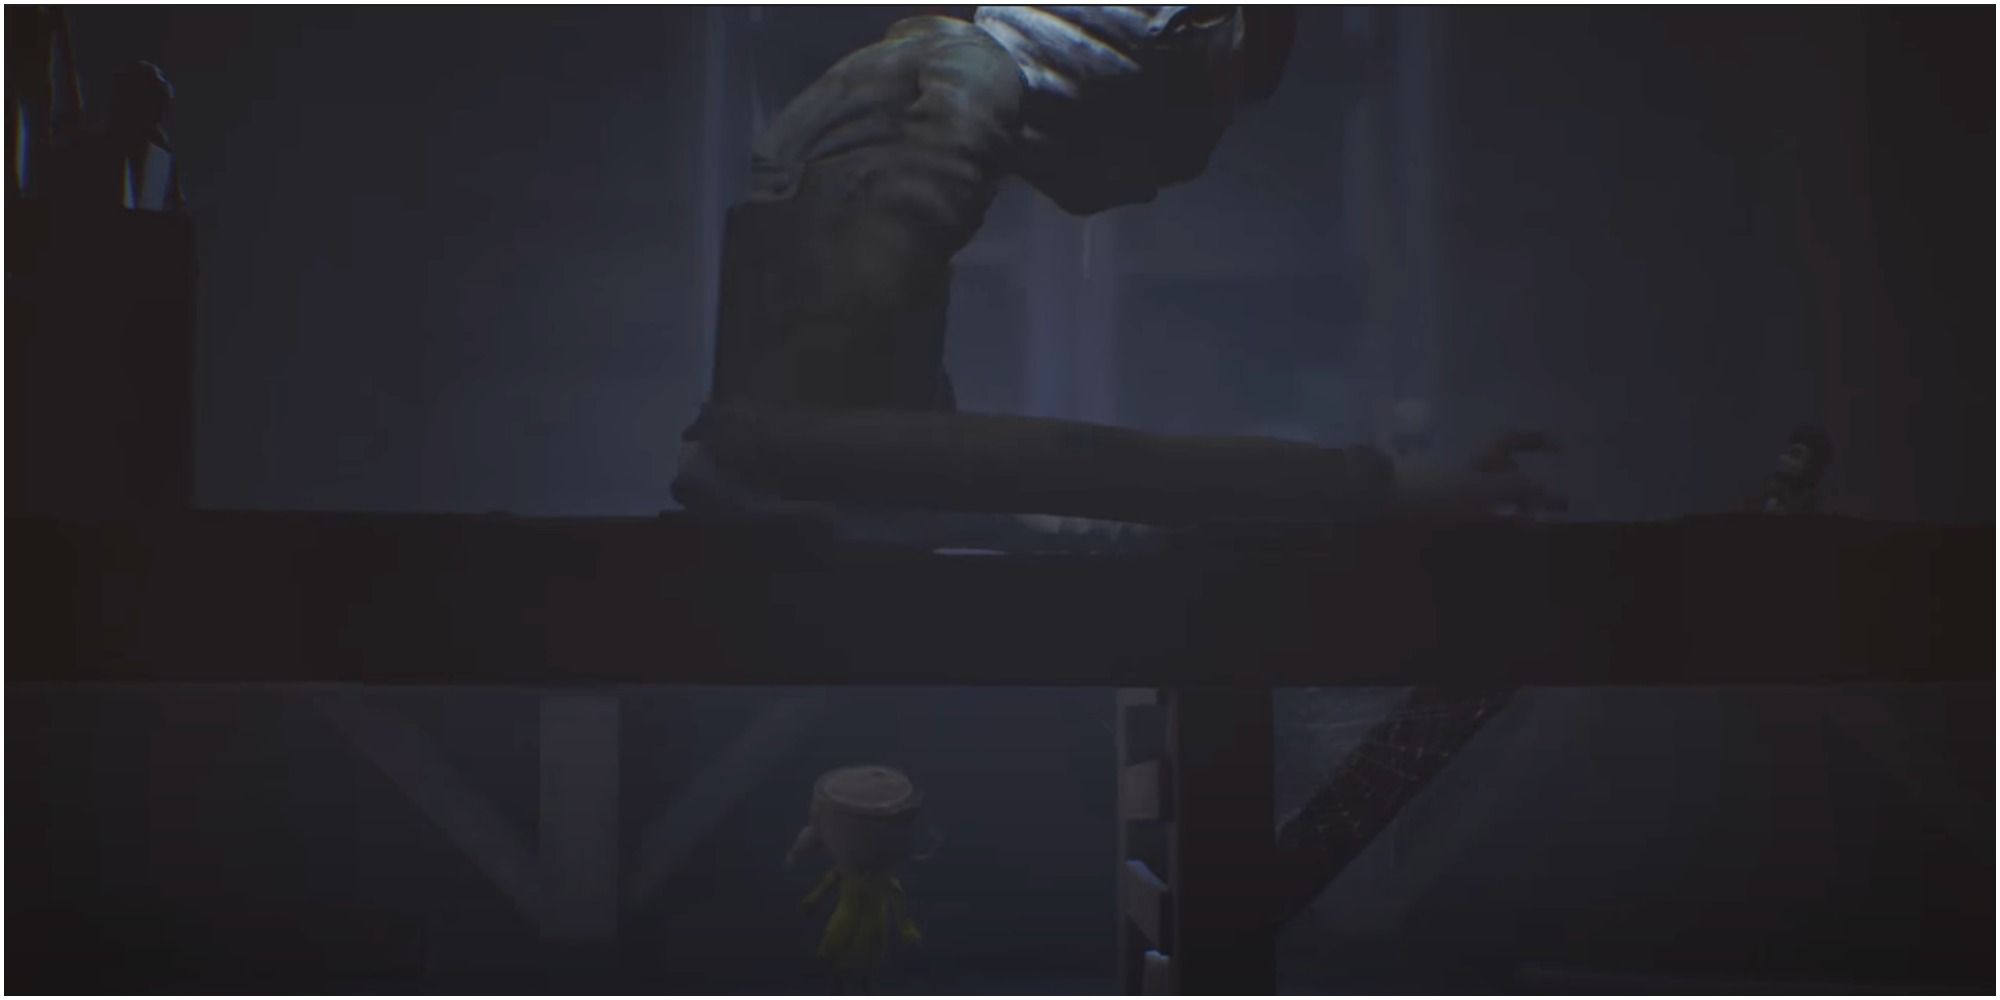 Little Nightmares Six hiding from The Janitor